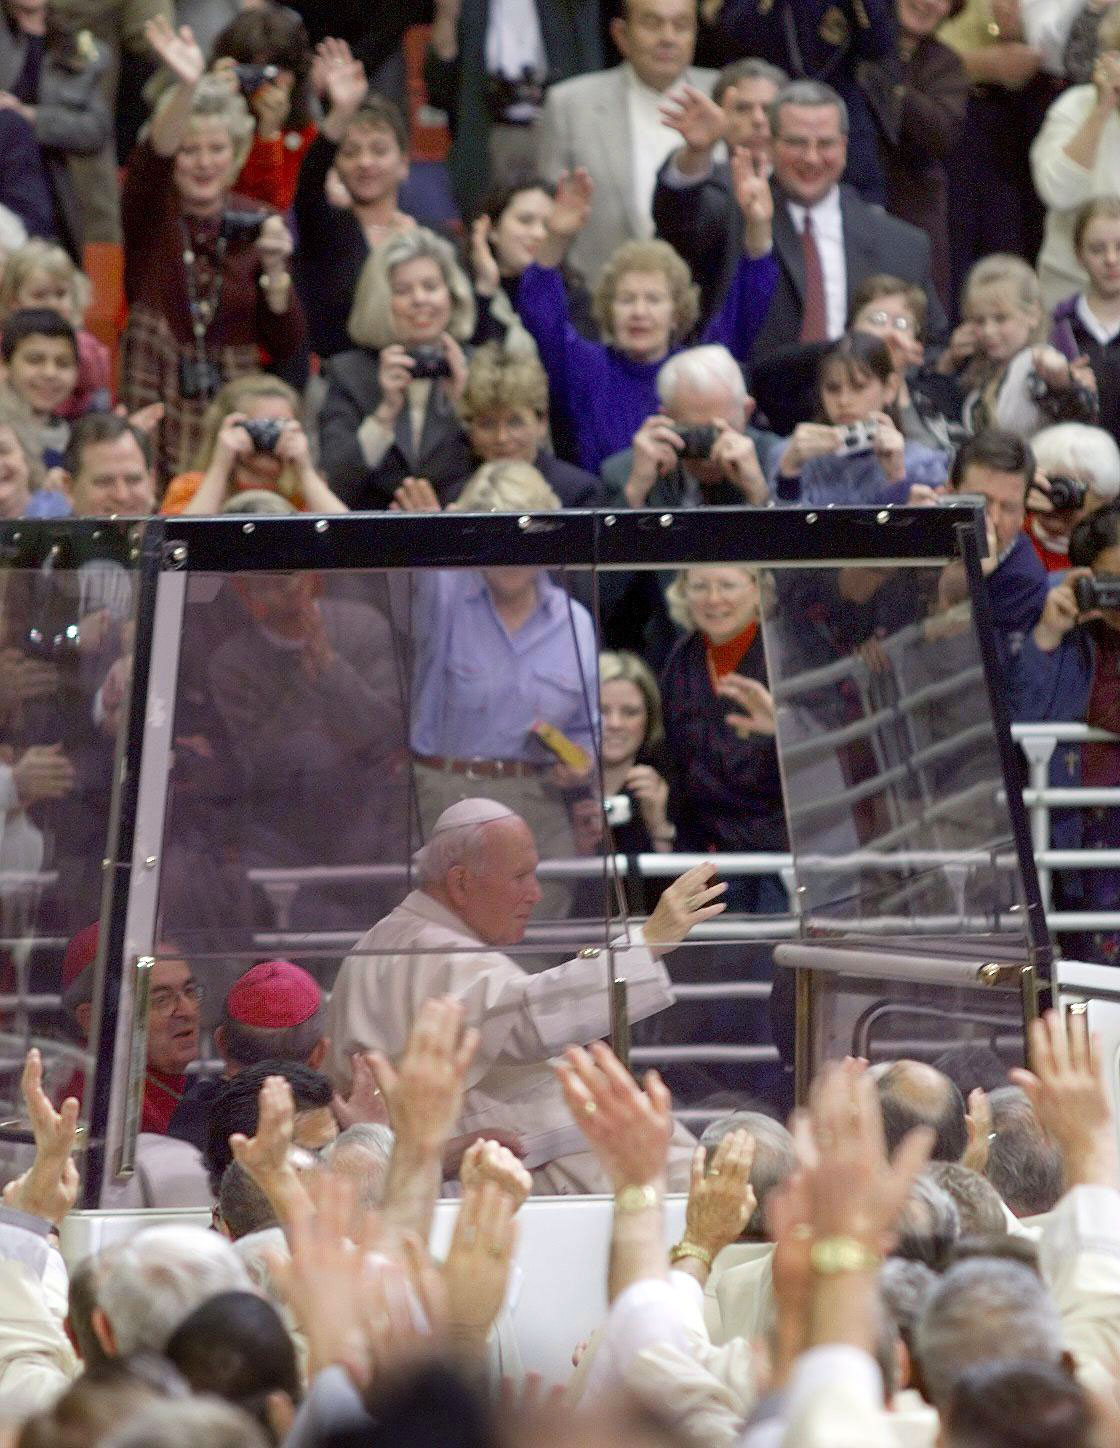 Pope John Paul II waves to the crowd as he arrives to say Mass in his bullet-proof "Popemobile" in St. Louis, January 27, 1999.